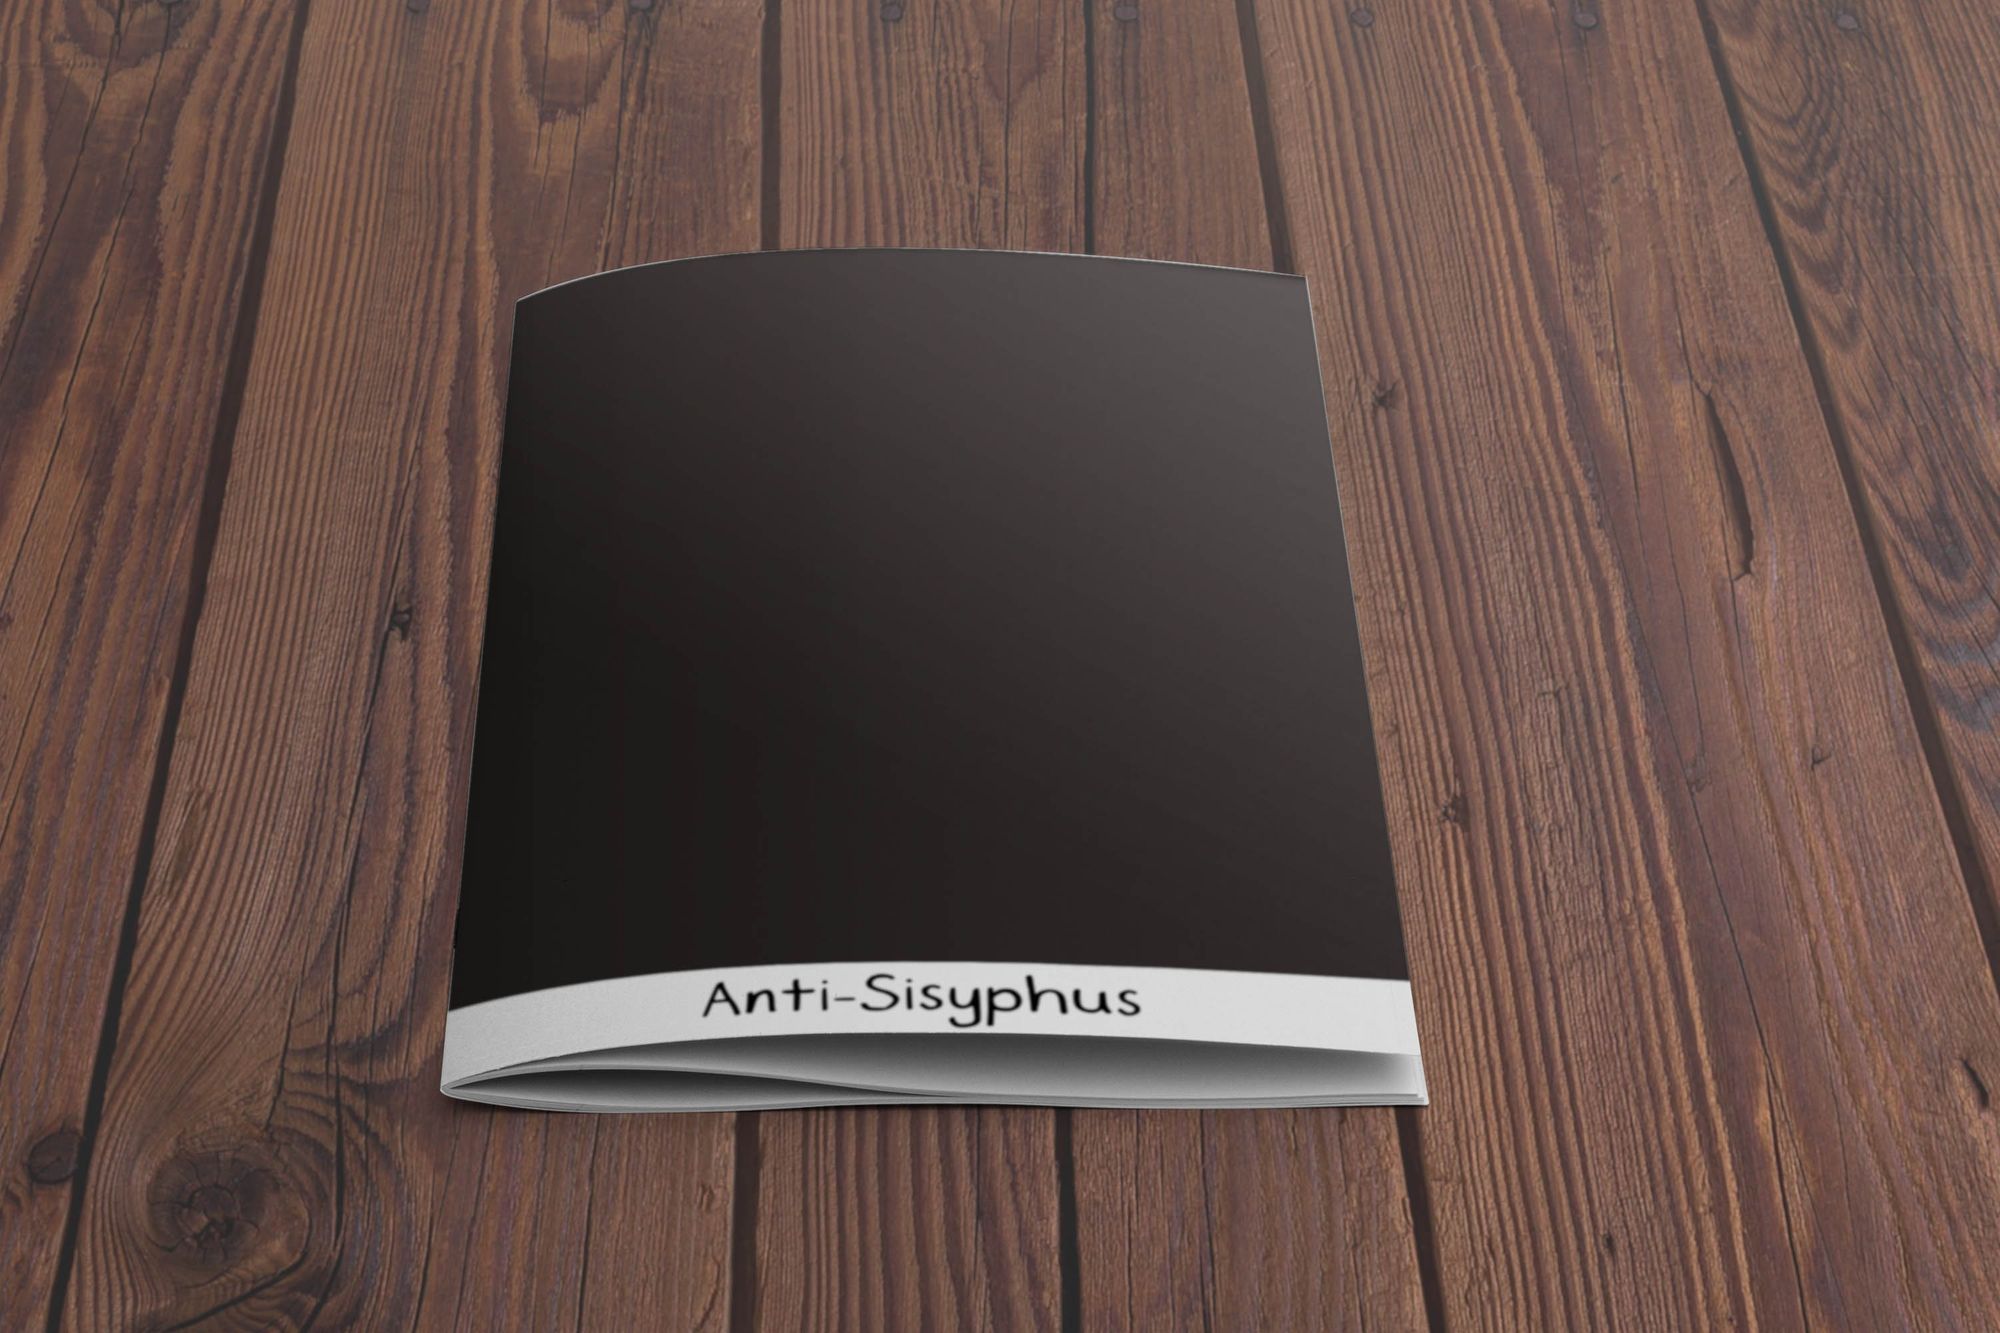 Review - Anti-Sysyphus